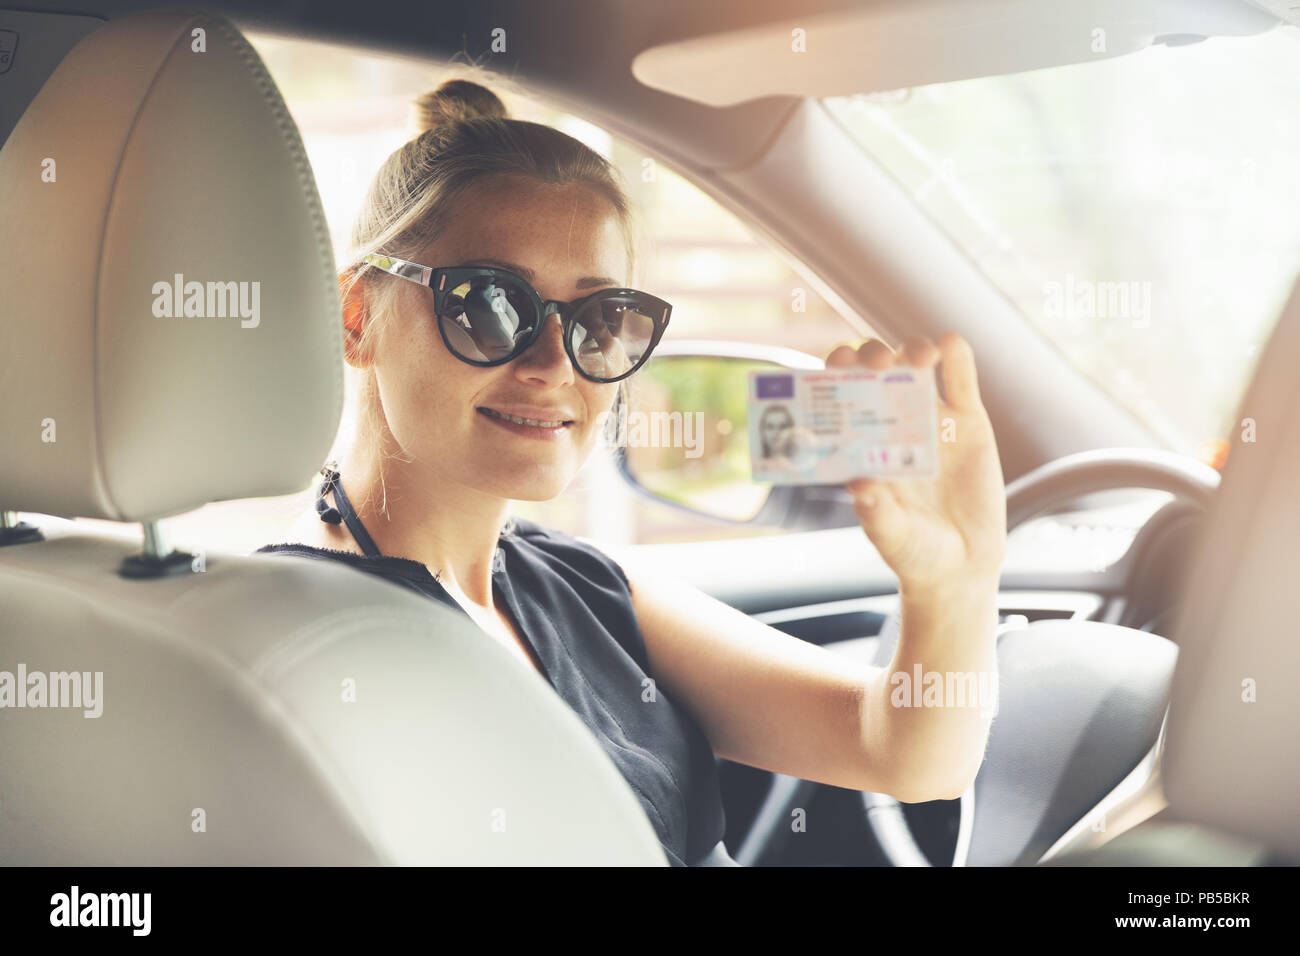 woman showing her new driver license in a car Stock Photo